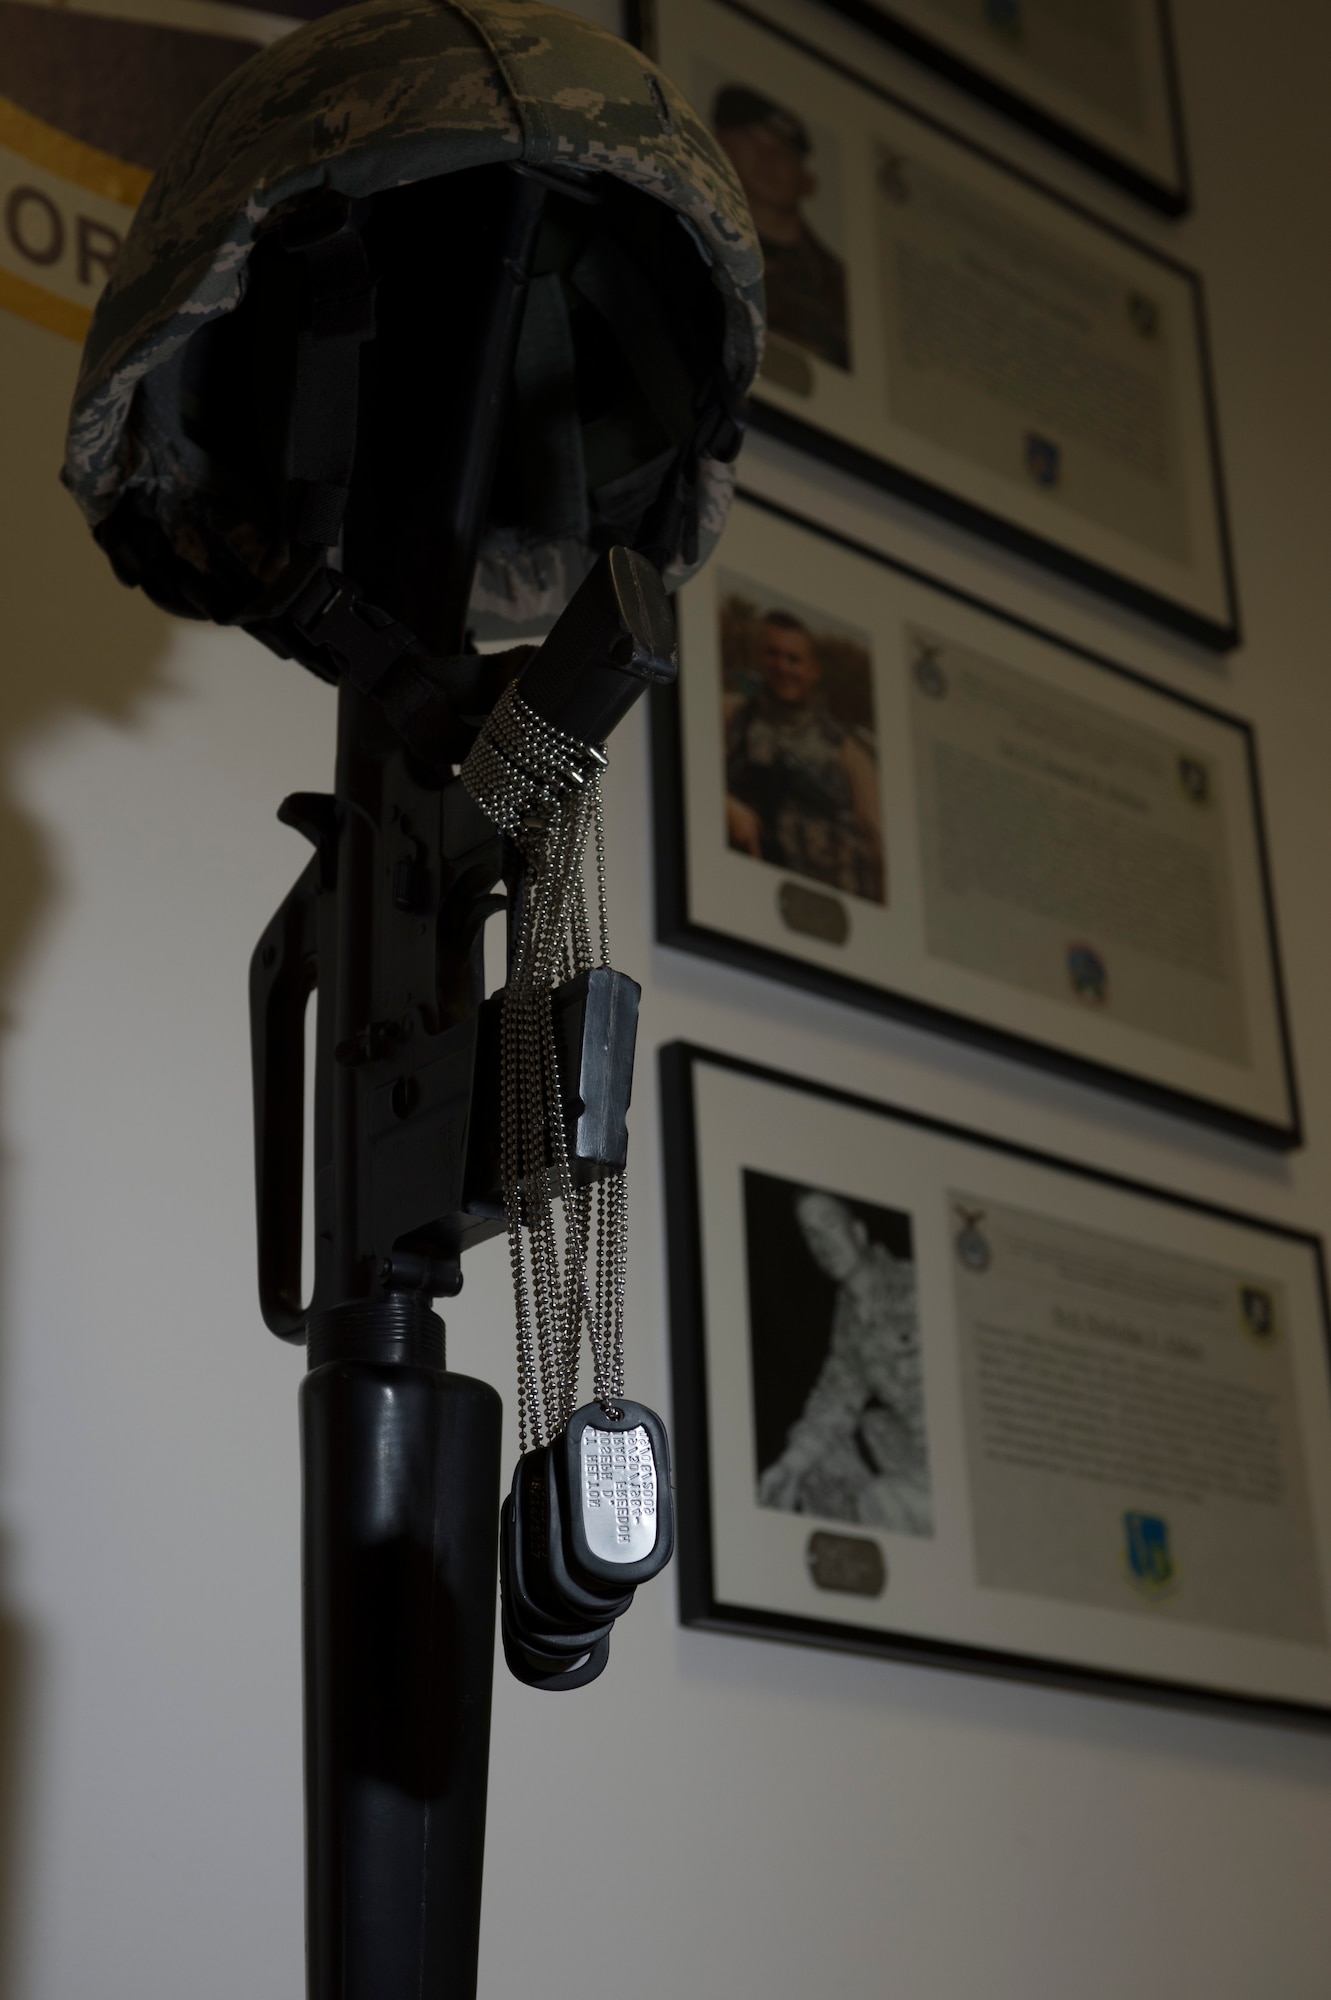 SPANDGDAHLEM AIR BASE, Germany – Dog-tags of nine fallen security forces members hang on an M-16 rifle as part of a Soldier’s cross March 1, 2013. This Soldier’s cross is a part of a memorial displayed at the 52nd Security Forces Squadron. The memorial commemorates nine fallen security forces Defenders who lost their lives serving their country after 9/11. (U.S. Air Force photo by Senior Airman Natasha Stannard/Released)